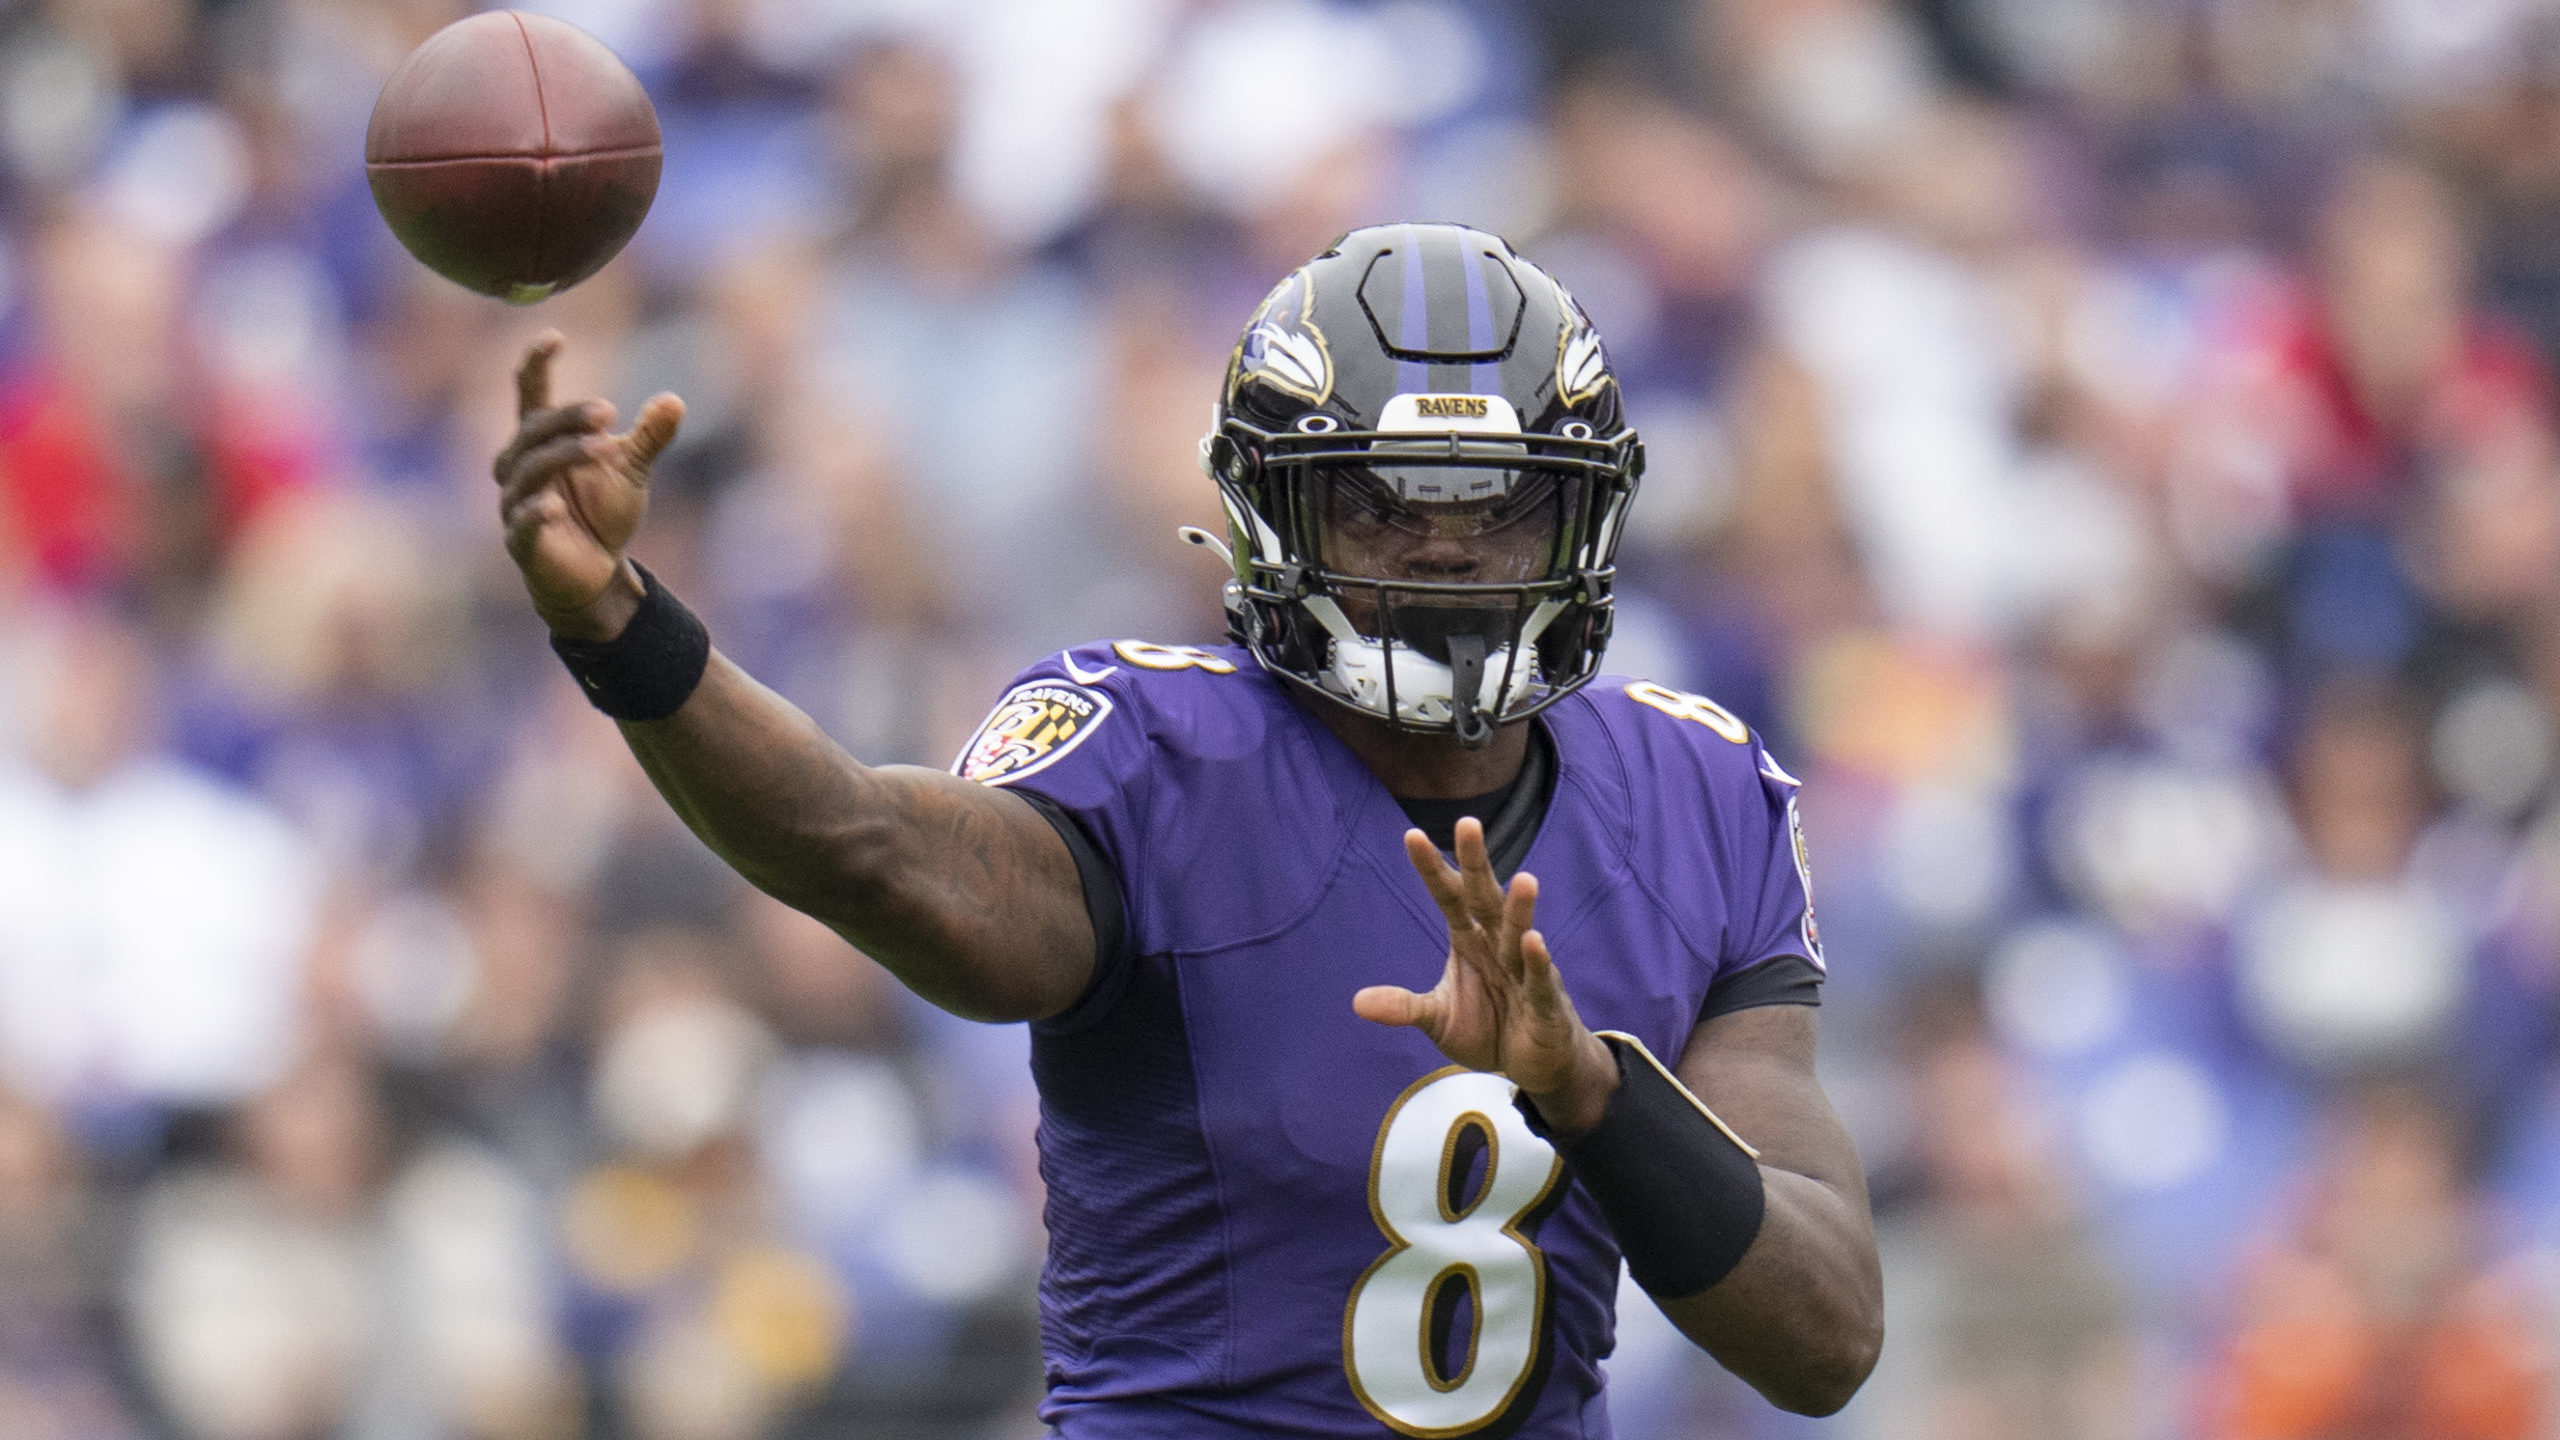 Ravens vs. Buccaneers Week 8 Scouting Report: Grades and Key Matchups